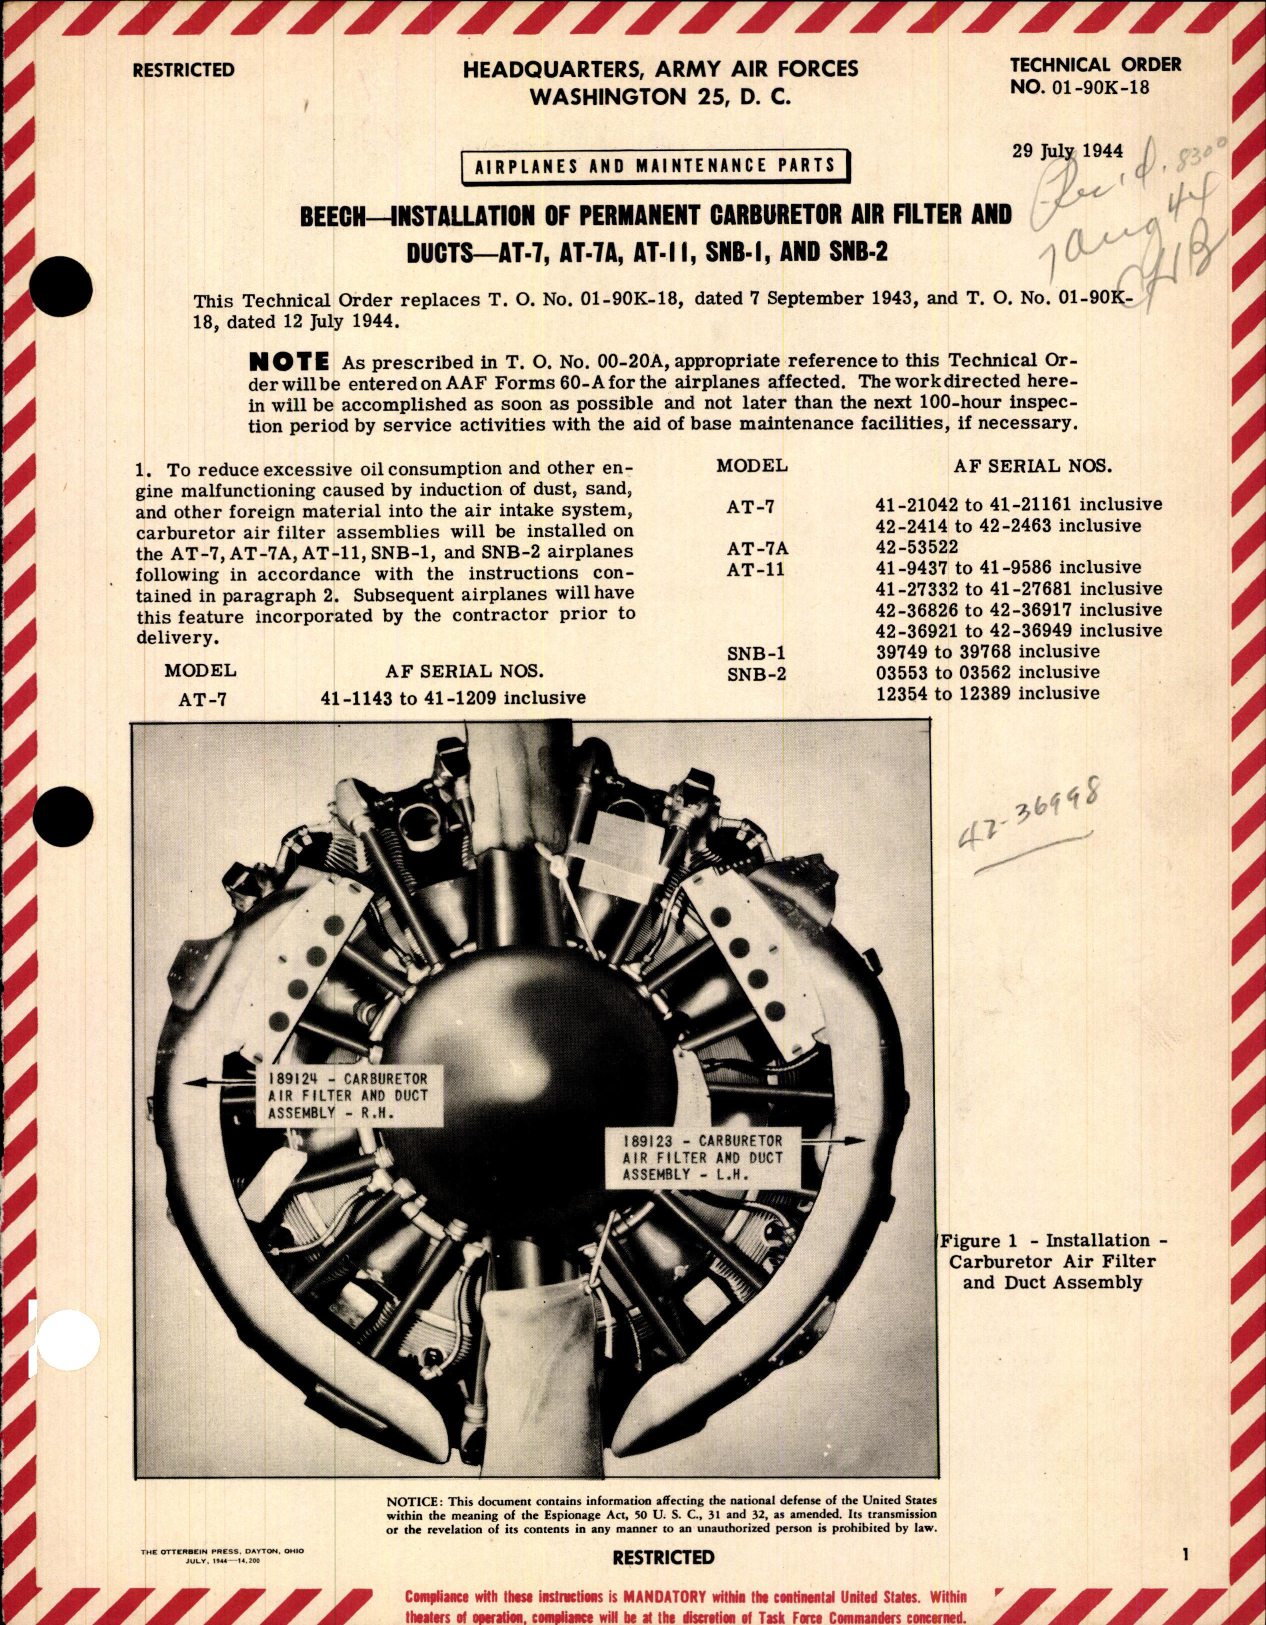 Sample page 1 from AirCorps Library document: Installation of Permanent Carburetor Air Filter and Ducts for AT-7, AT-7A, AT-11, SNB-1, and SNB-2